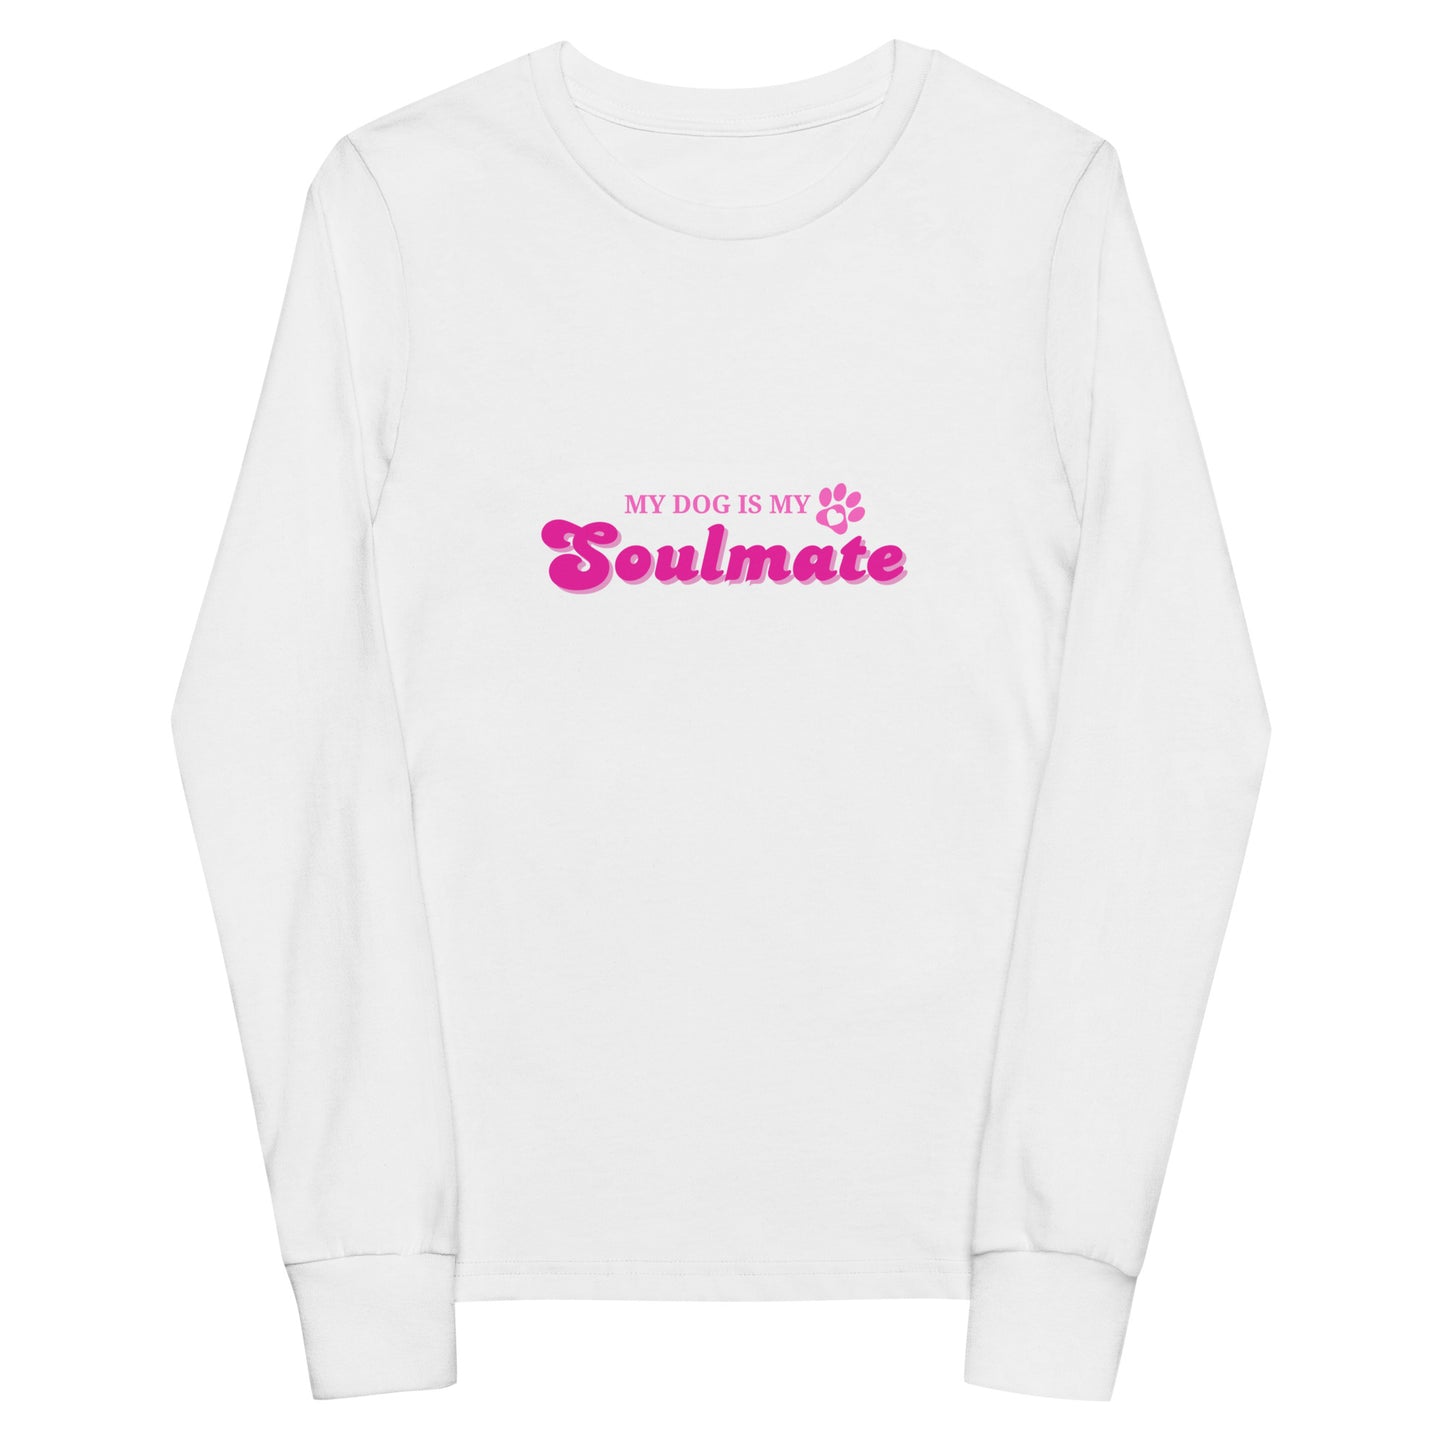 My Dog Is My Soulmate Youth long sleeve tee